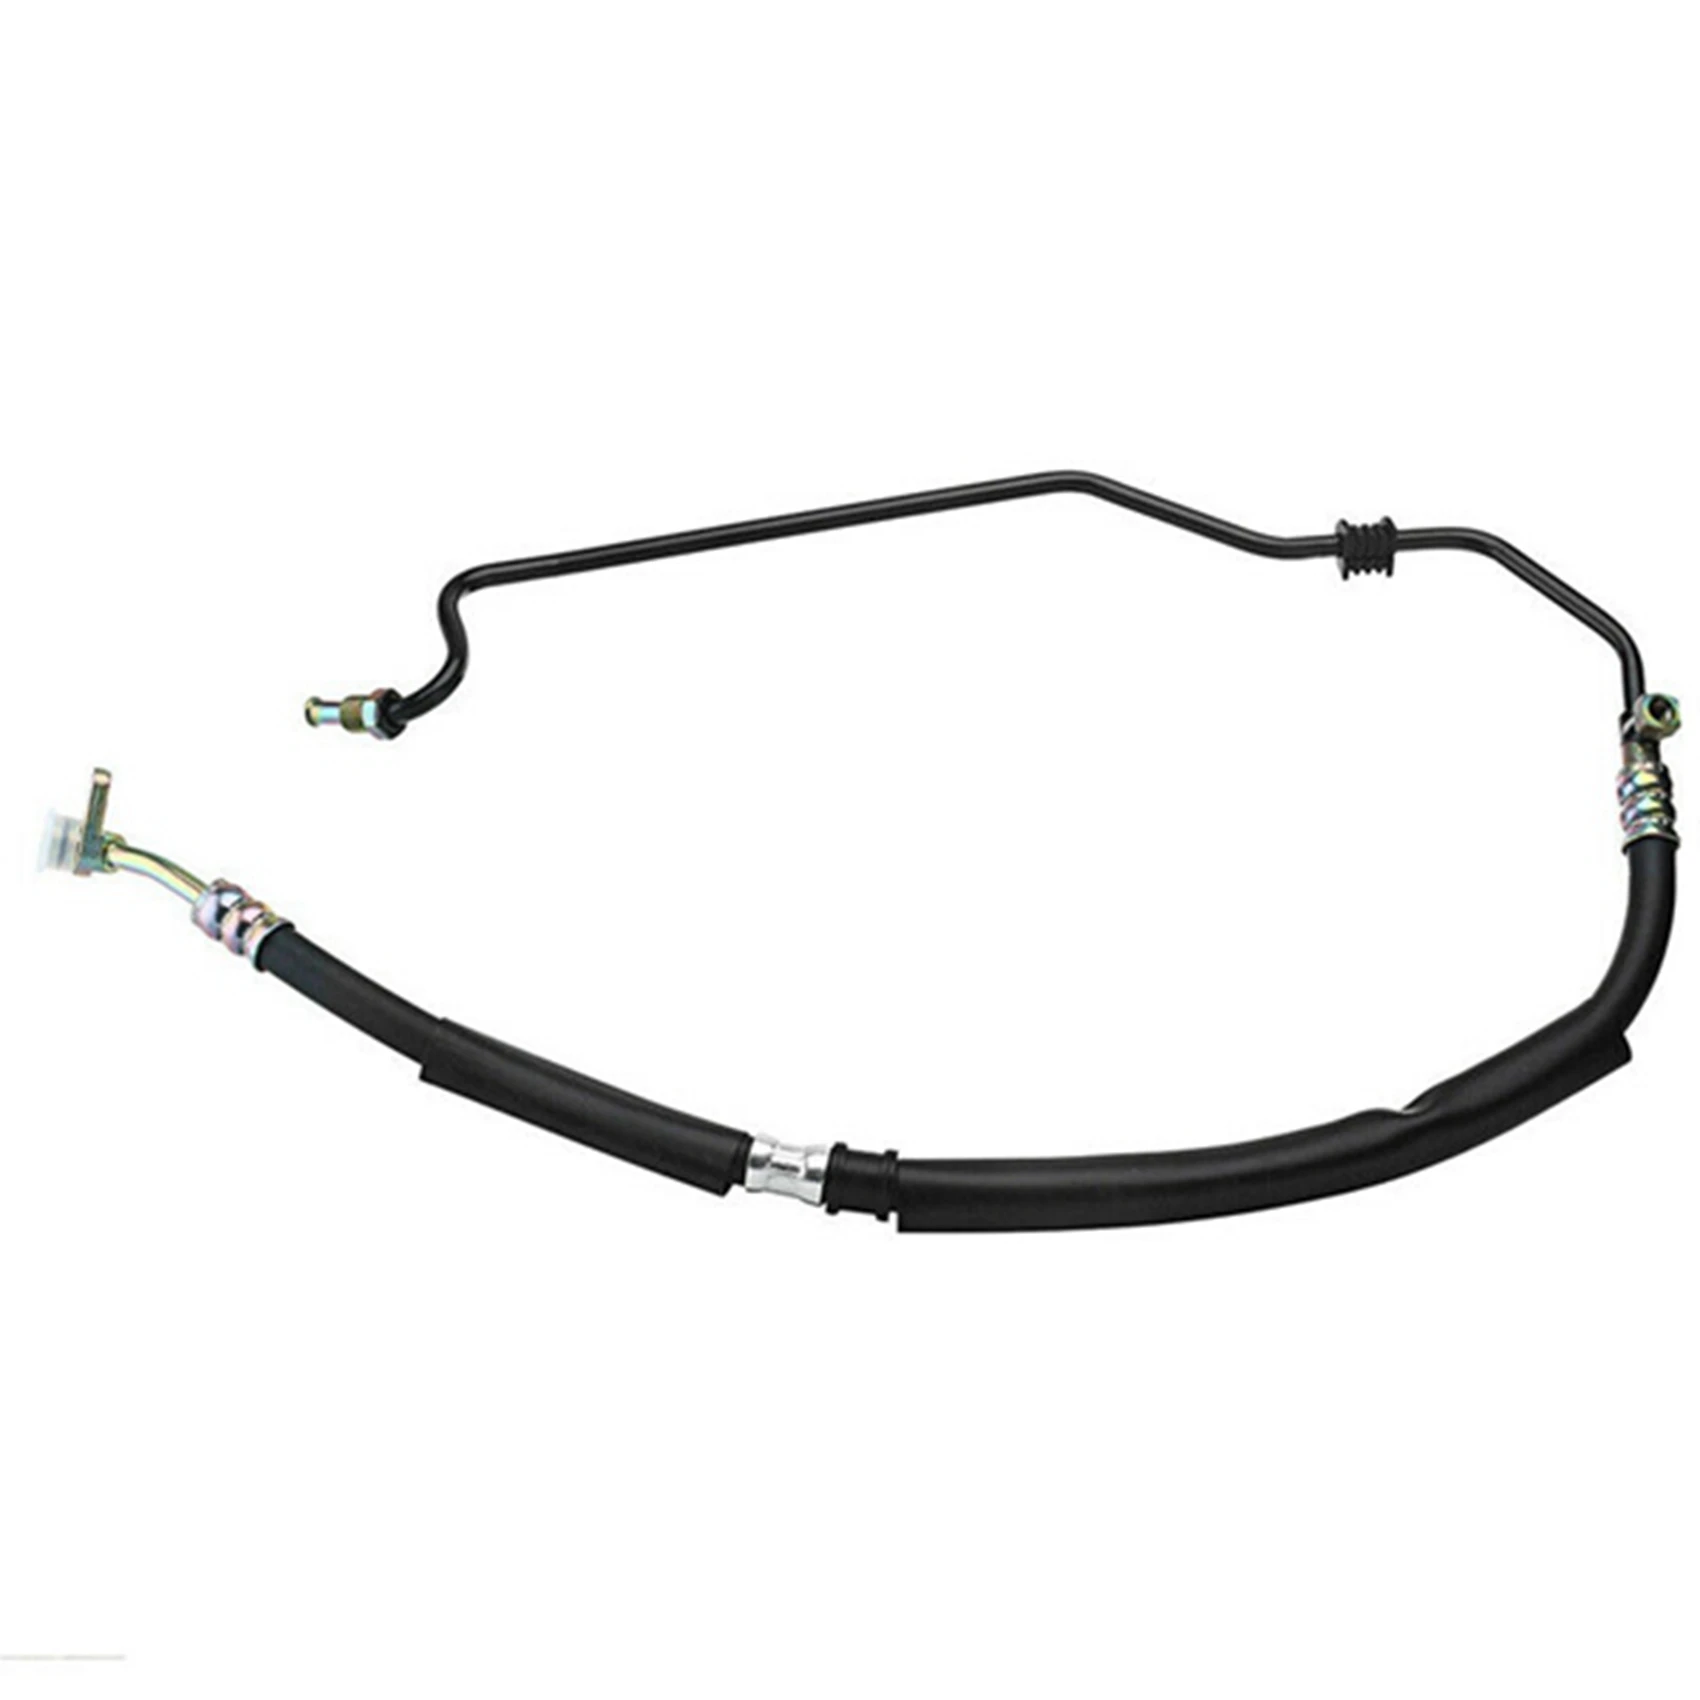 

New P/S Power Steering Pressure Oil Hose for TSX Accord 2.4L 2004-2008 53713-SDC-A02